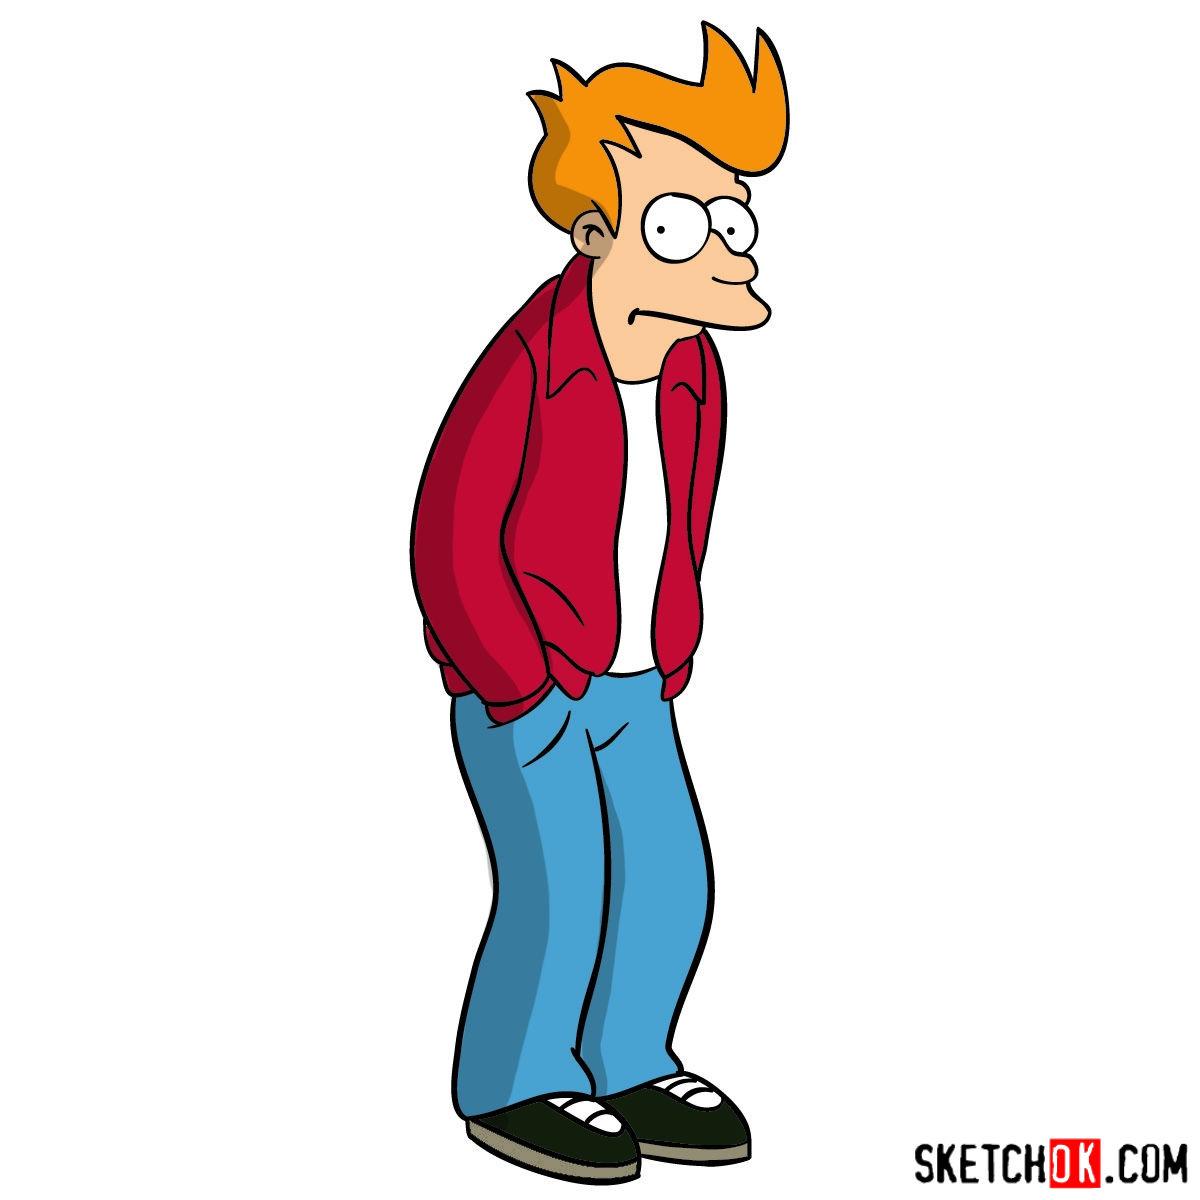 How to draw Philip J. Fry step by step - coloring